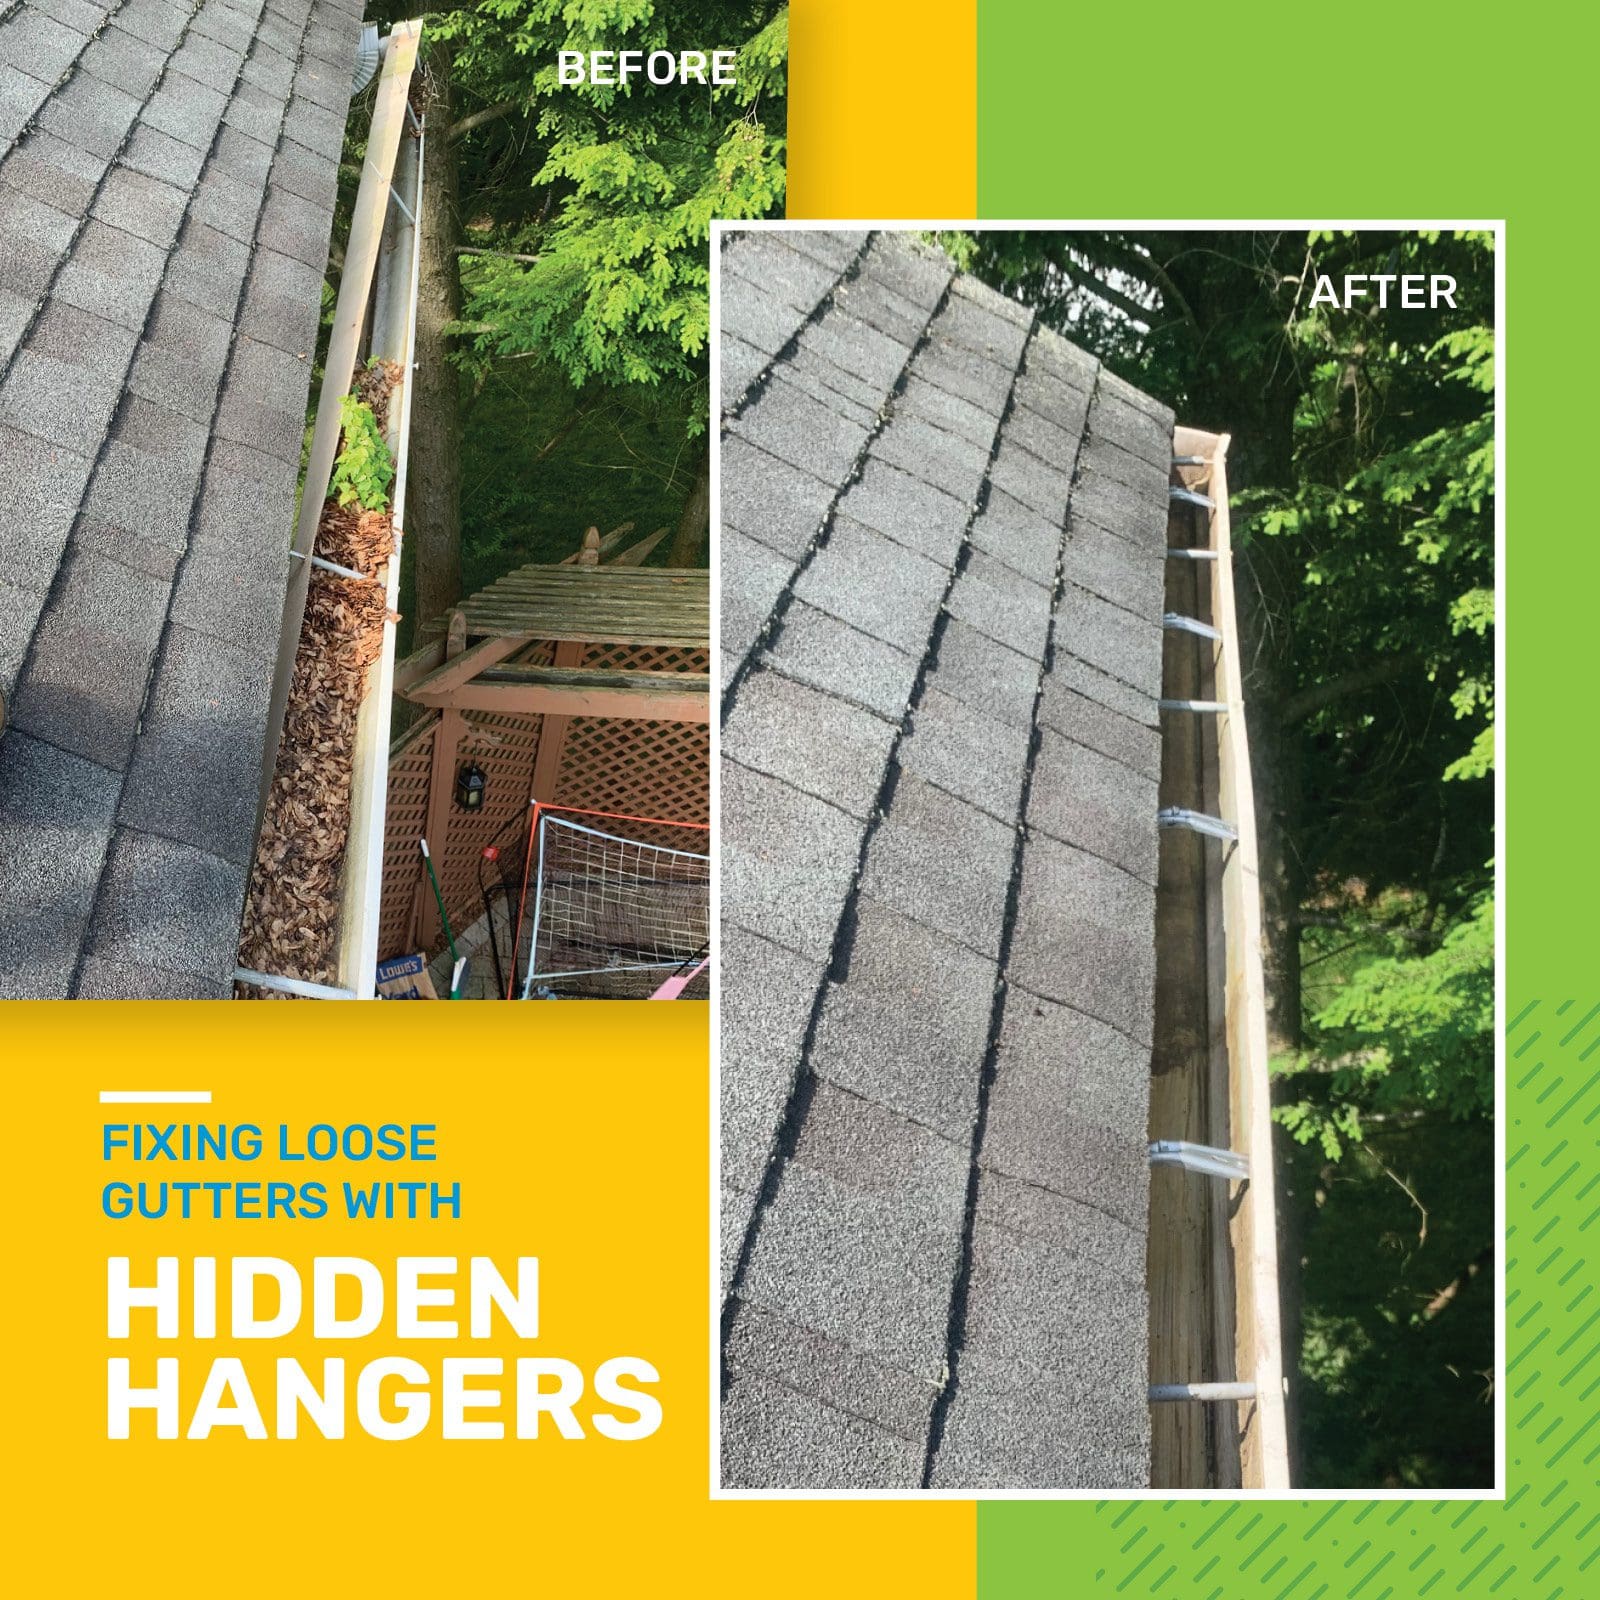 Fixing loose gutters with hidden hangers before and after picture